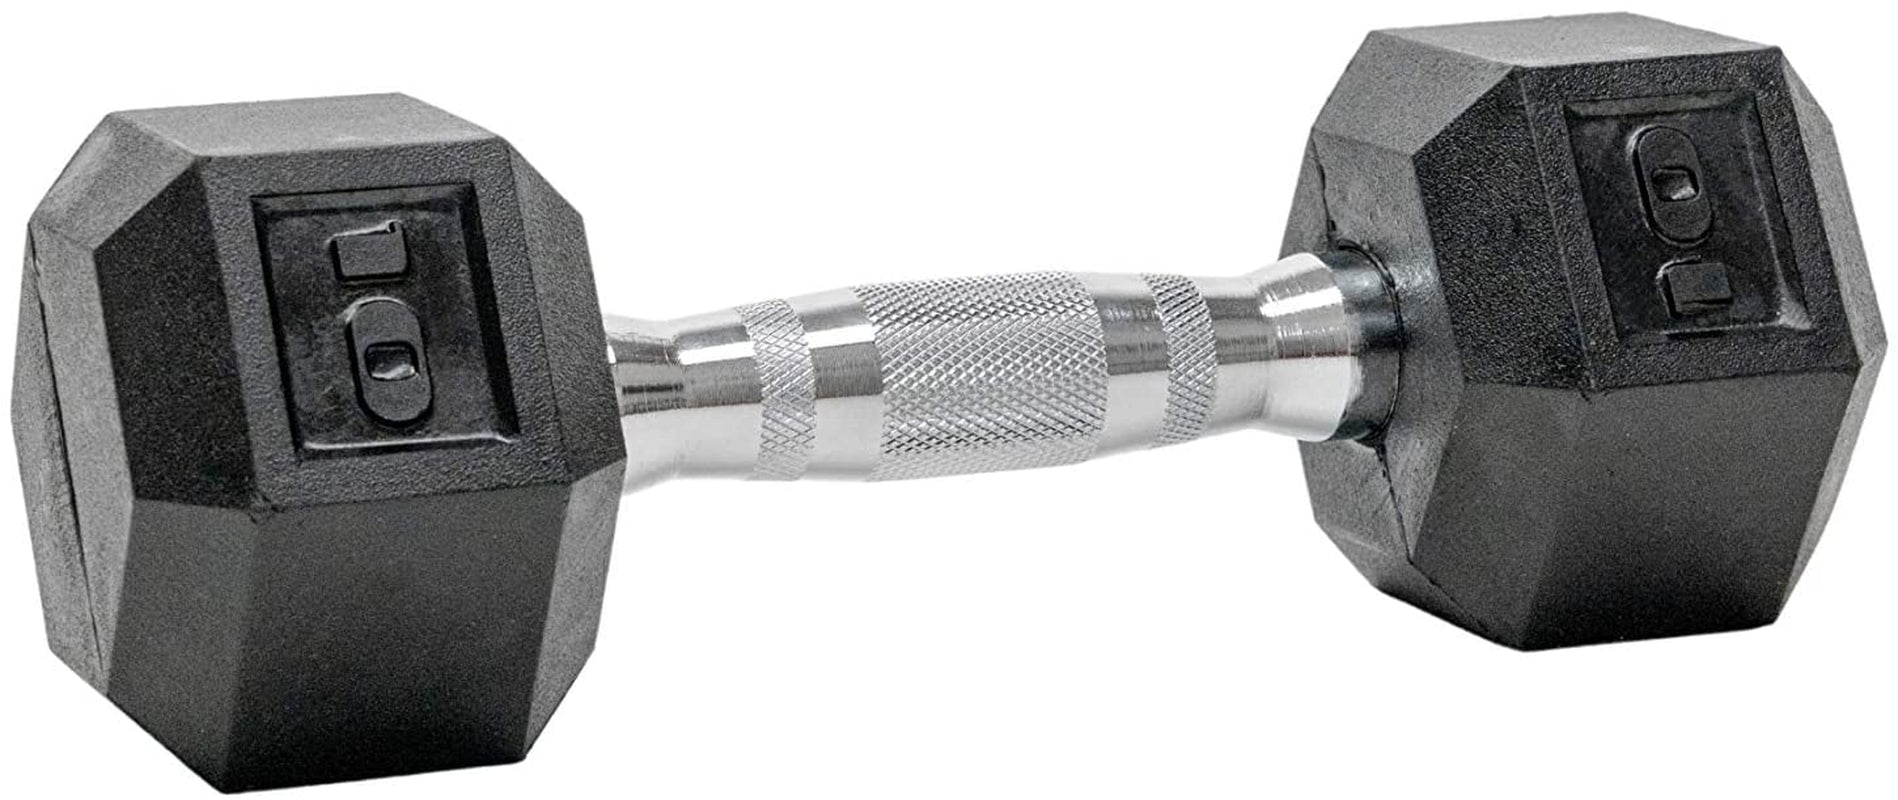 Hex Elite TPR Dumbbells - Rubber Dumbbells Designed with Chrome-Plated Steel Handles, TPU Heads, and Hexagon-Shaped Rubber-Encased Ends